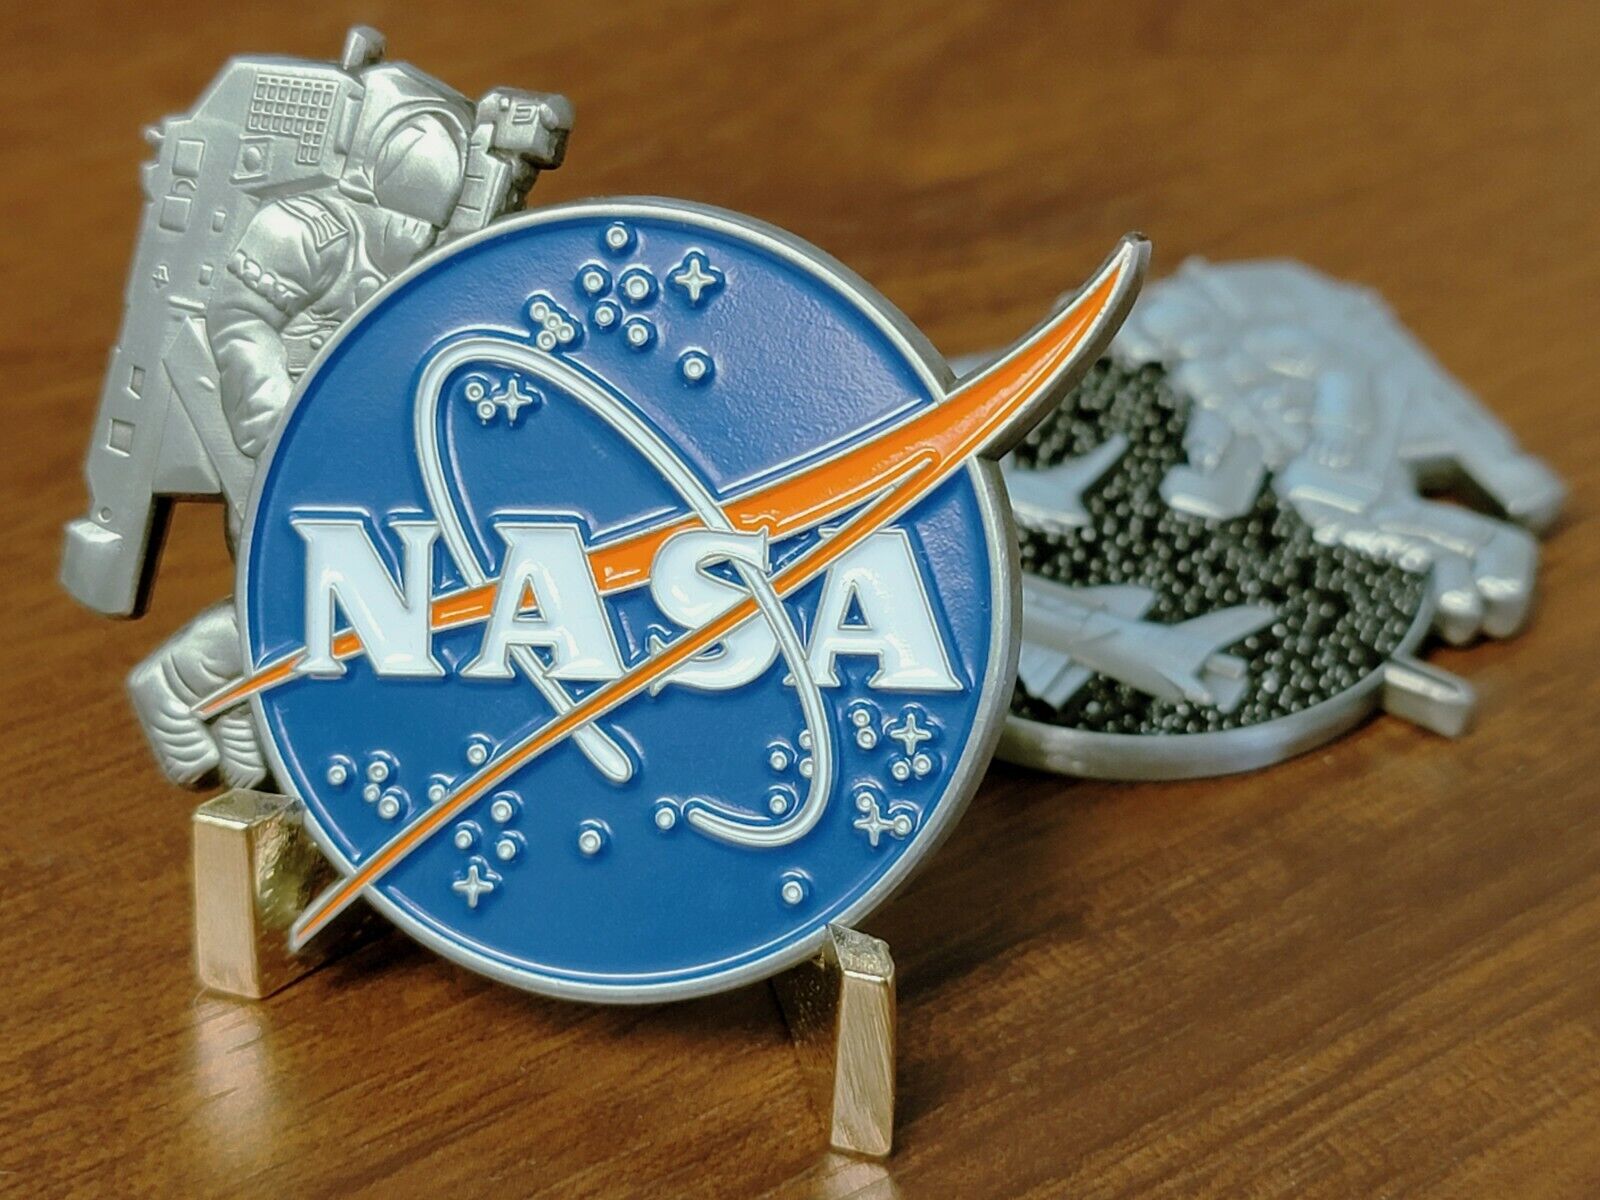 NASA Astronaut odd shaped Challenge Coin - New Coins For Anything product